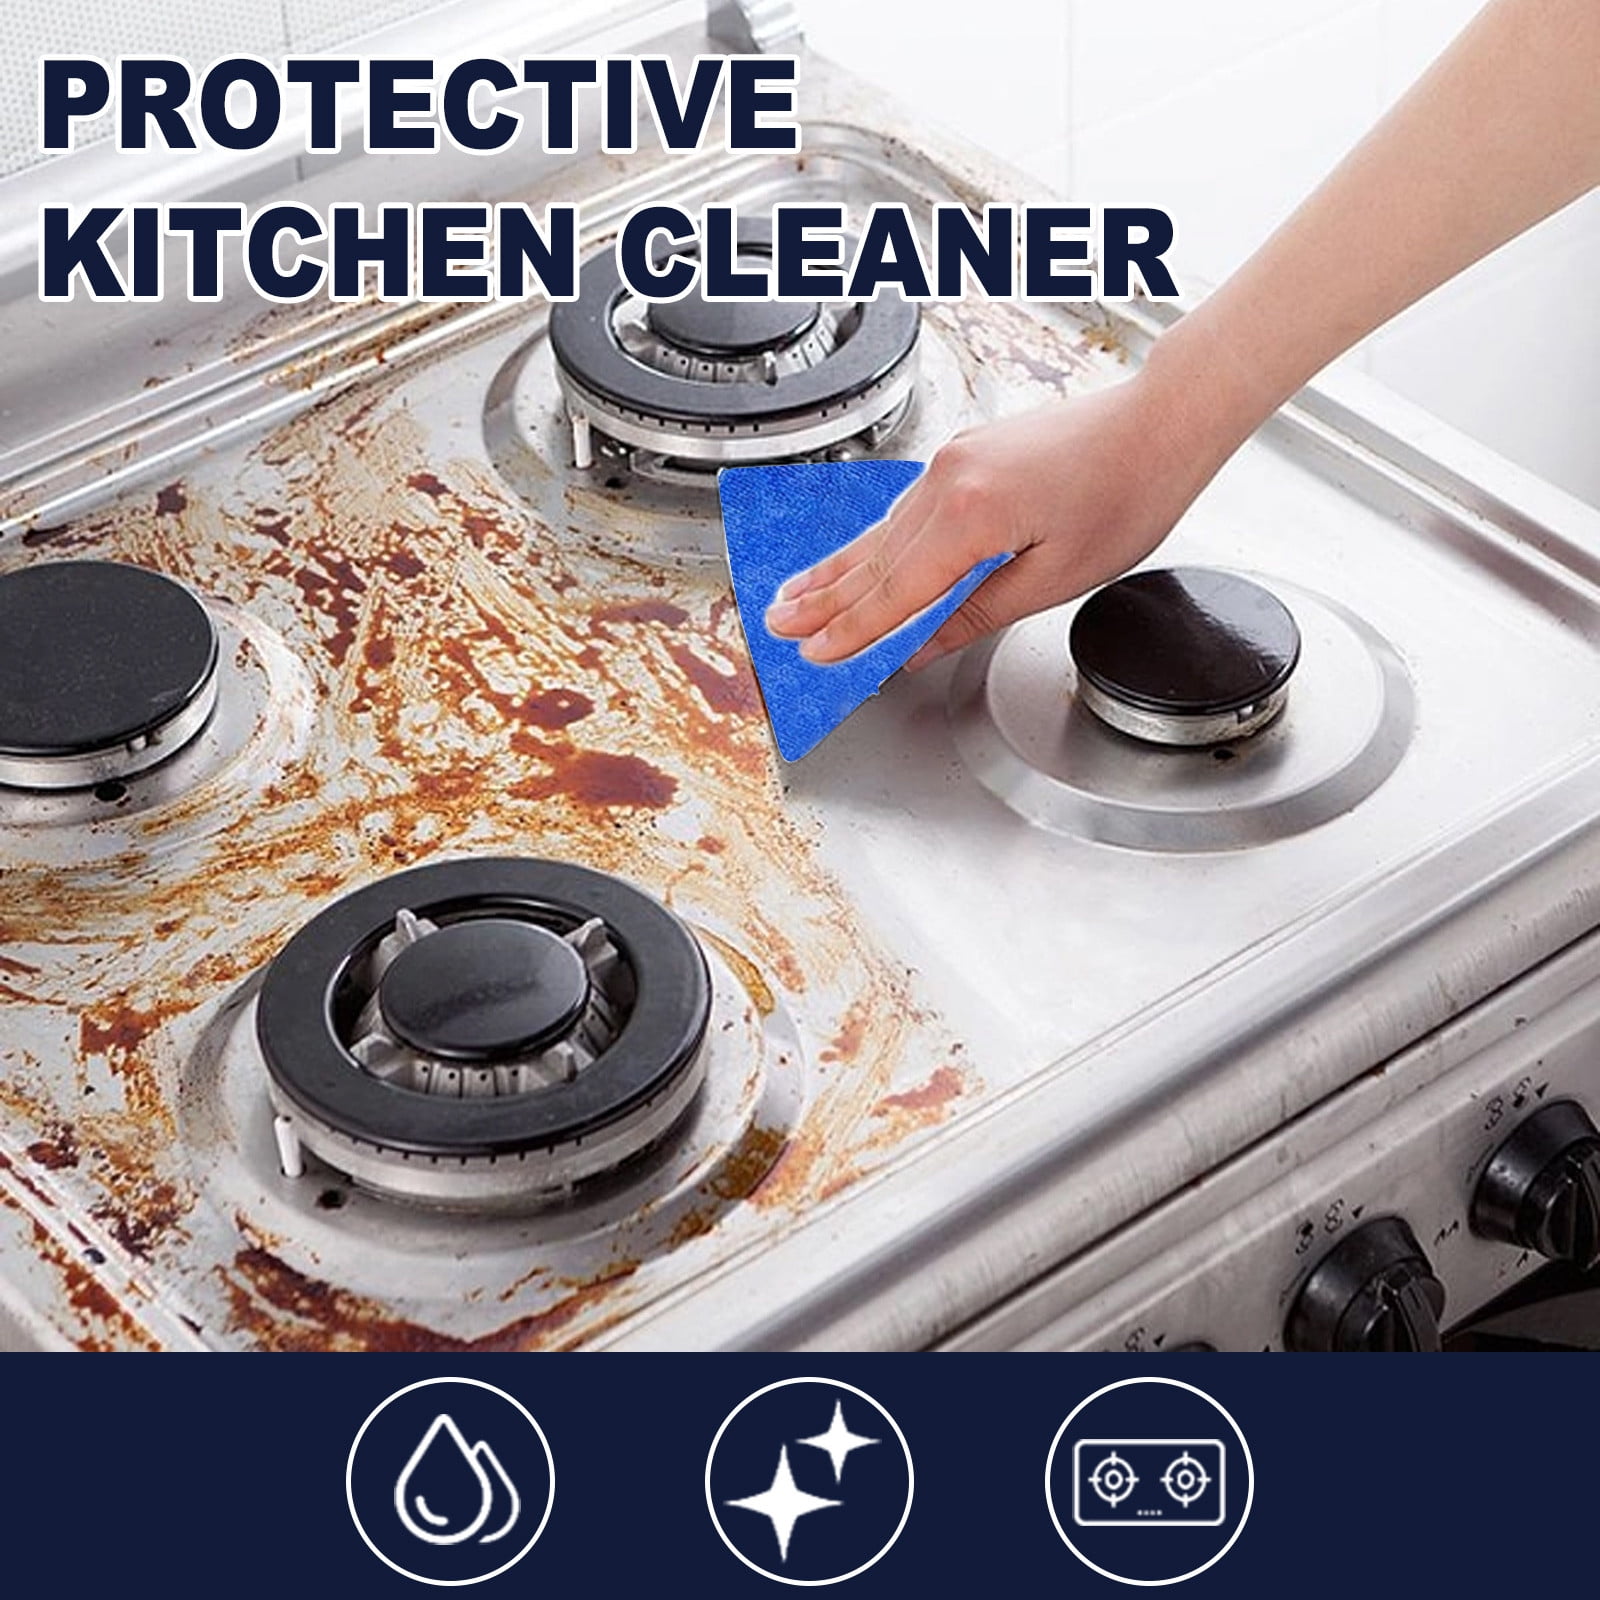 XYUAE 2023 New Heavy Duty Degreaser Cleaner, M.O.F-CHEF Protective Kitchen  Cleaner, Mof Chef Cleaner Powder, Heavy Kitchen Duty Degreaser, Kitchen Oil  Pollution Cleaning Powder (6PCS) price in Saudi Arabia